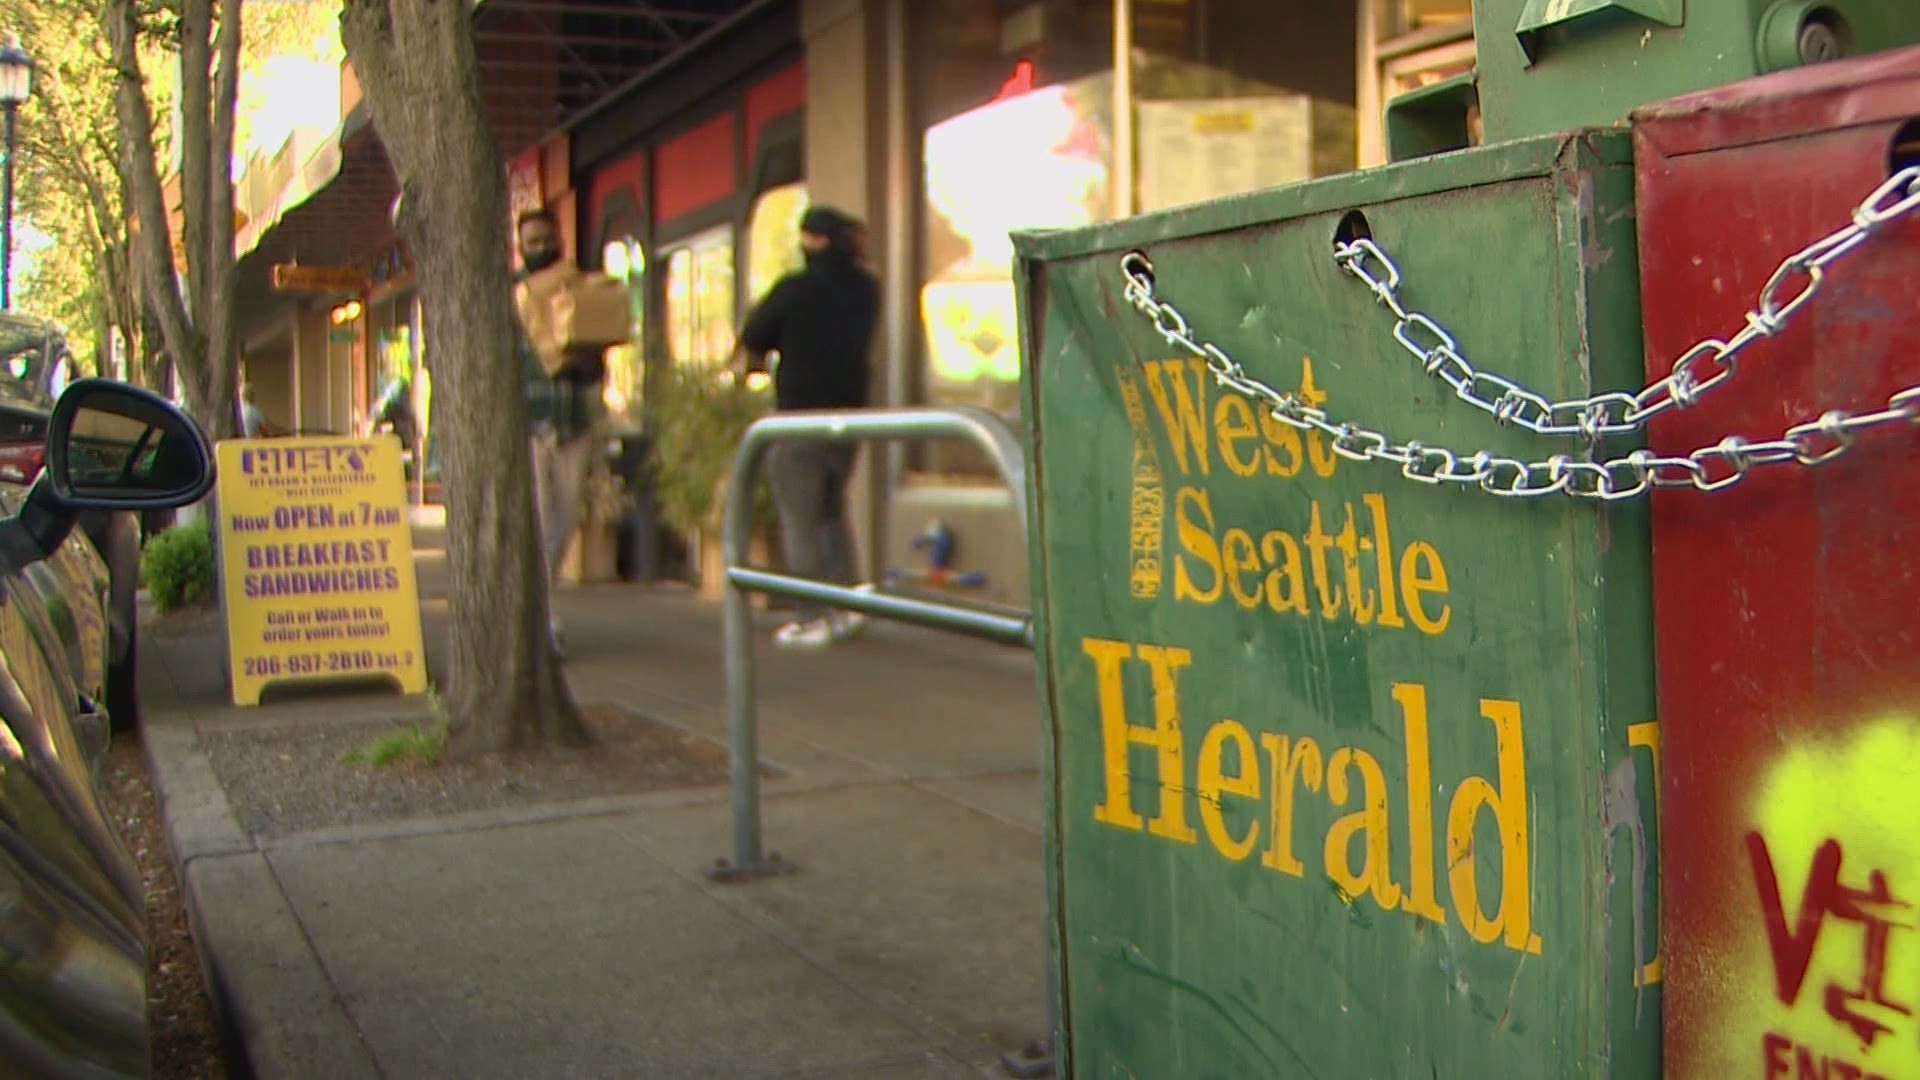 For nearly 100 years, the West Seattle Herald, now called Westside Seattle, has told the stories of people who live here.